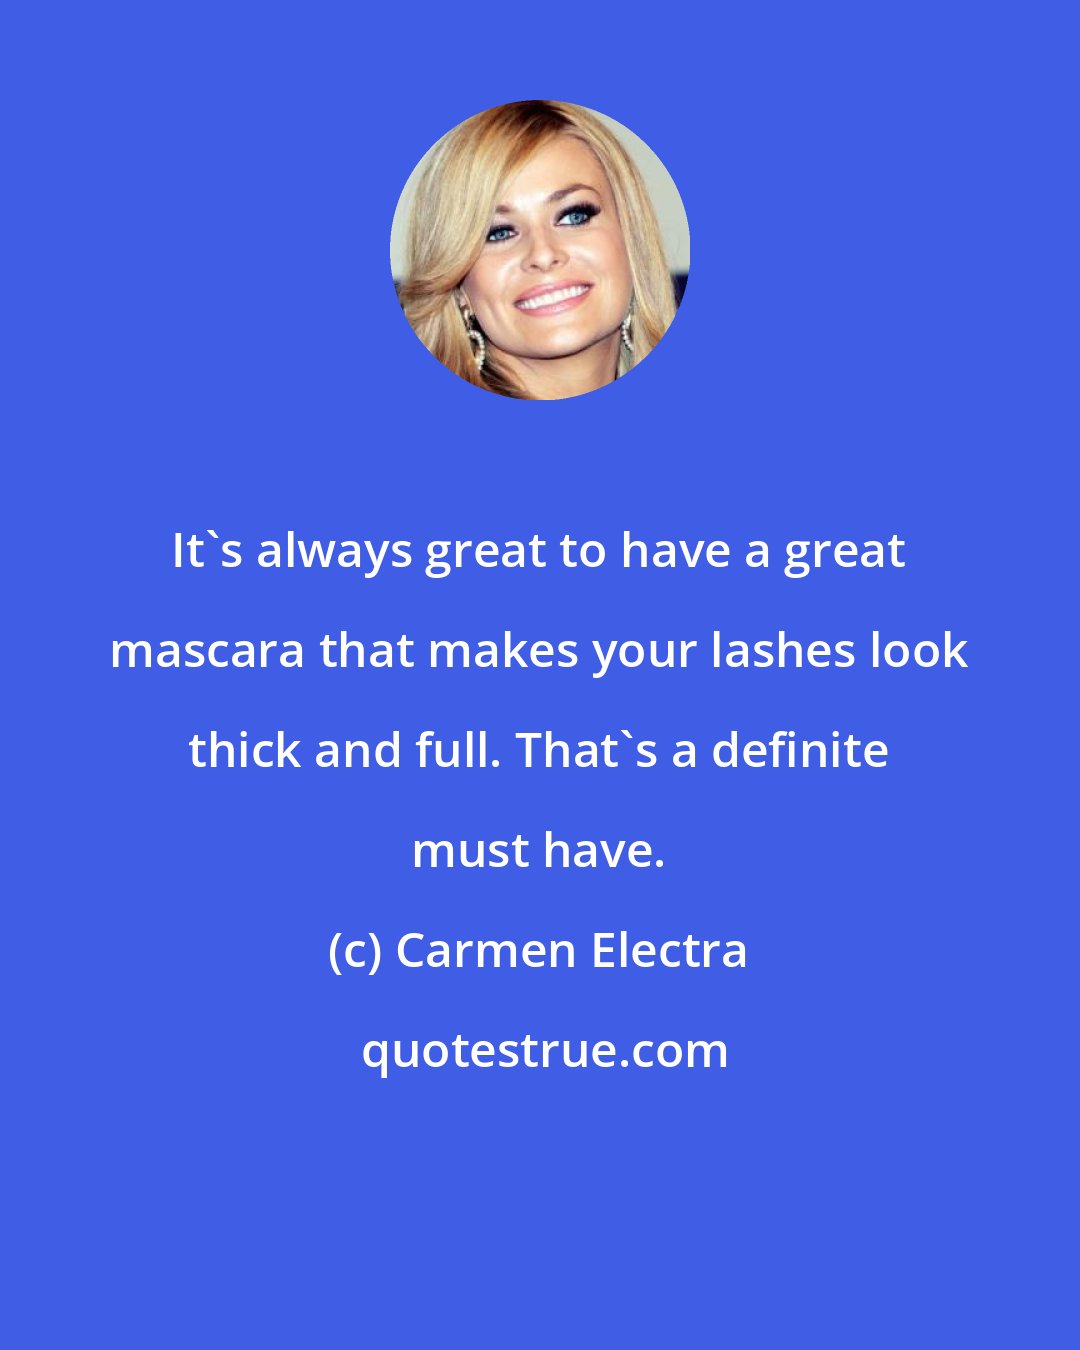 Carmen Electra: It's always great to have a great mascara that makes your lashes look thick and full. That's a definite must have.